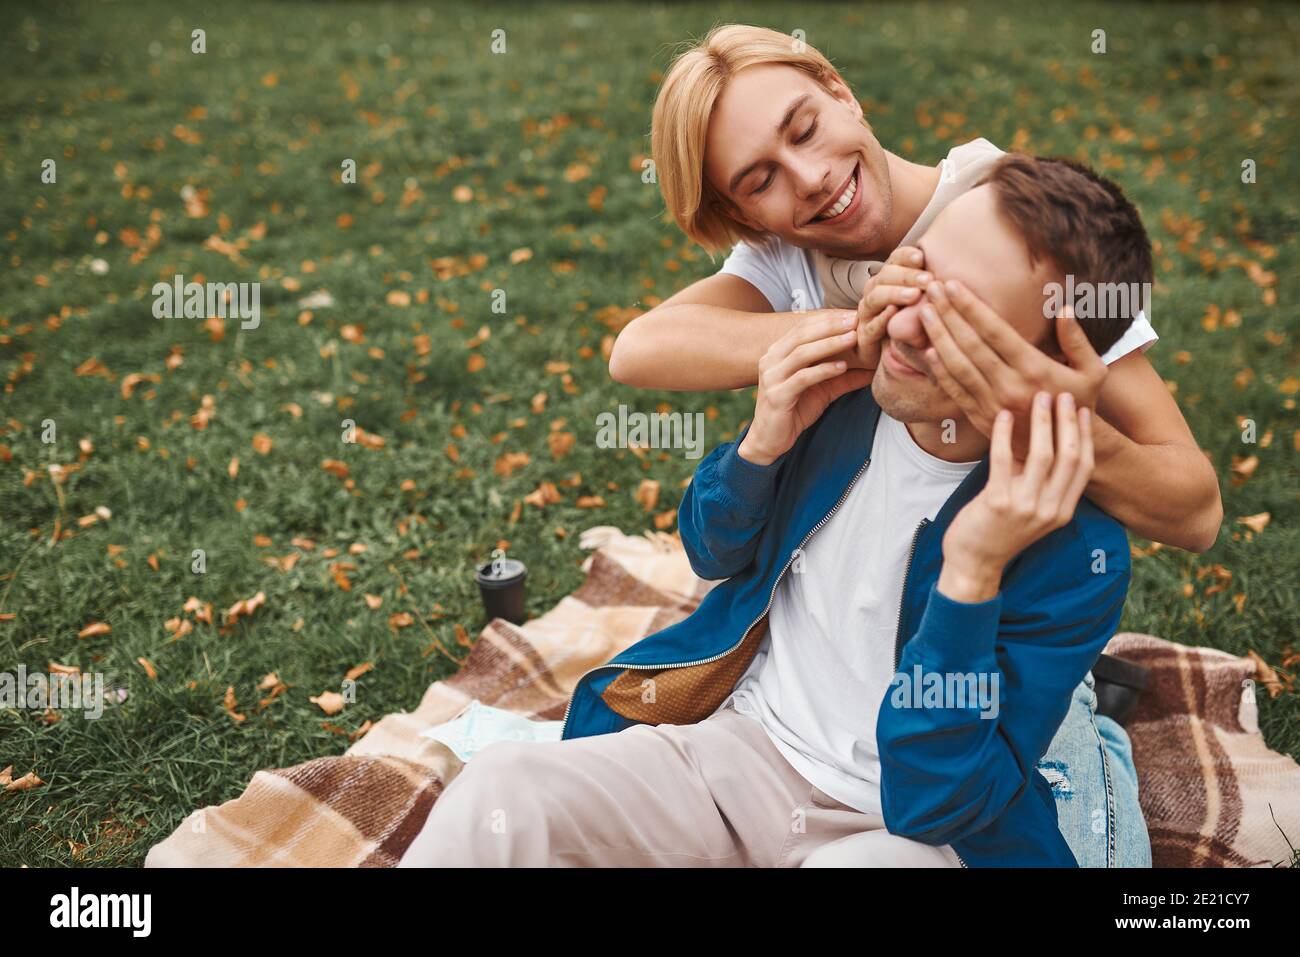 Loving gay couple having romantic date outdoors. Two handsome men sitting together on blanket in park. LGBT concept. Stock Photo